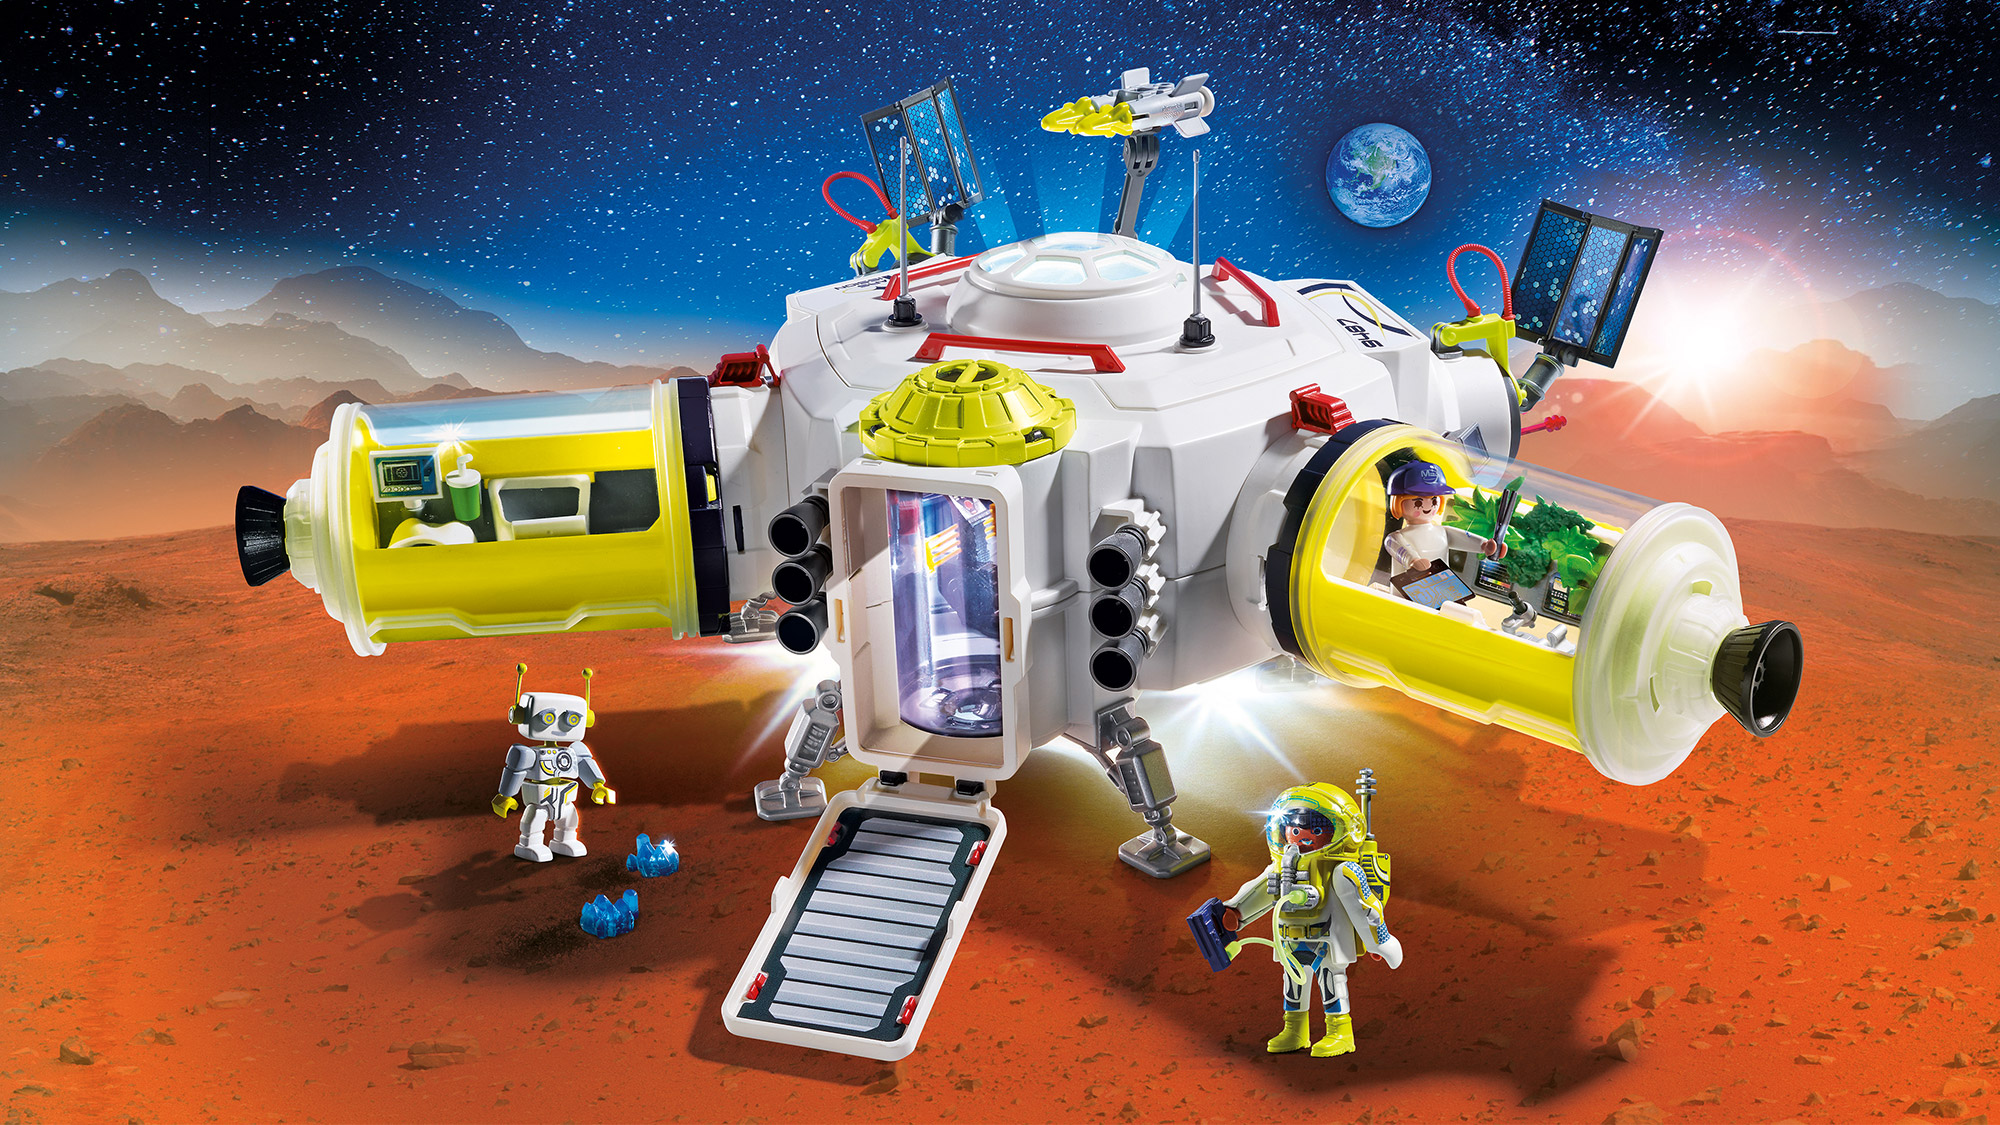 Playmobil unveils two new Back to the Future sets -Toy World Magazine